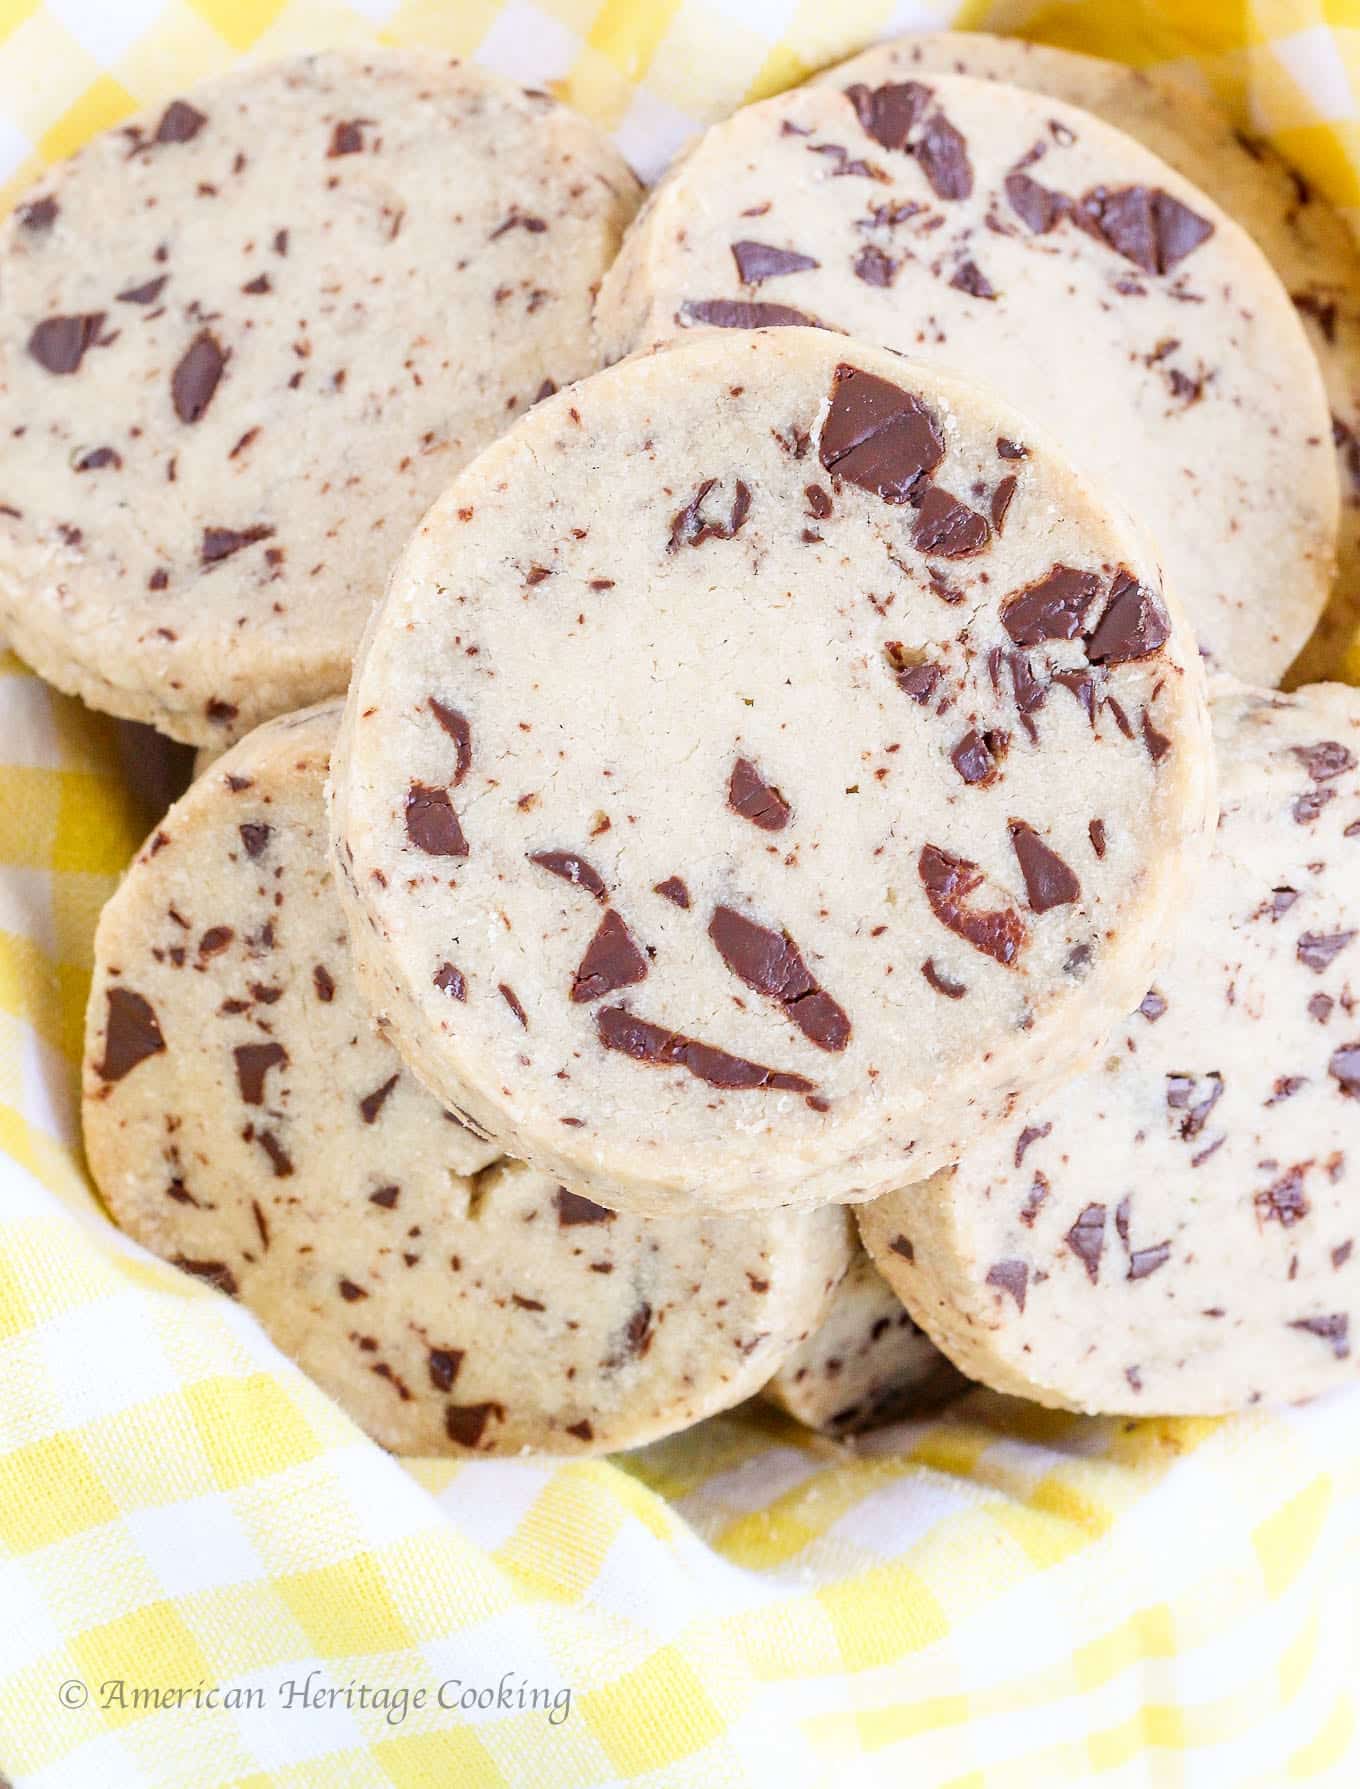 These Chocolate Chip Shortbread Cookies magically have texture of a classic shortbread cookie while remaining soft and moist. A sweet brown sugar, vanilla dough is marbled with semi-sweet chocolate chips for a sweet treat that is perfect as dessert or with a cup of coffee! 